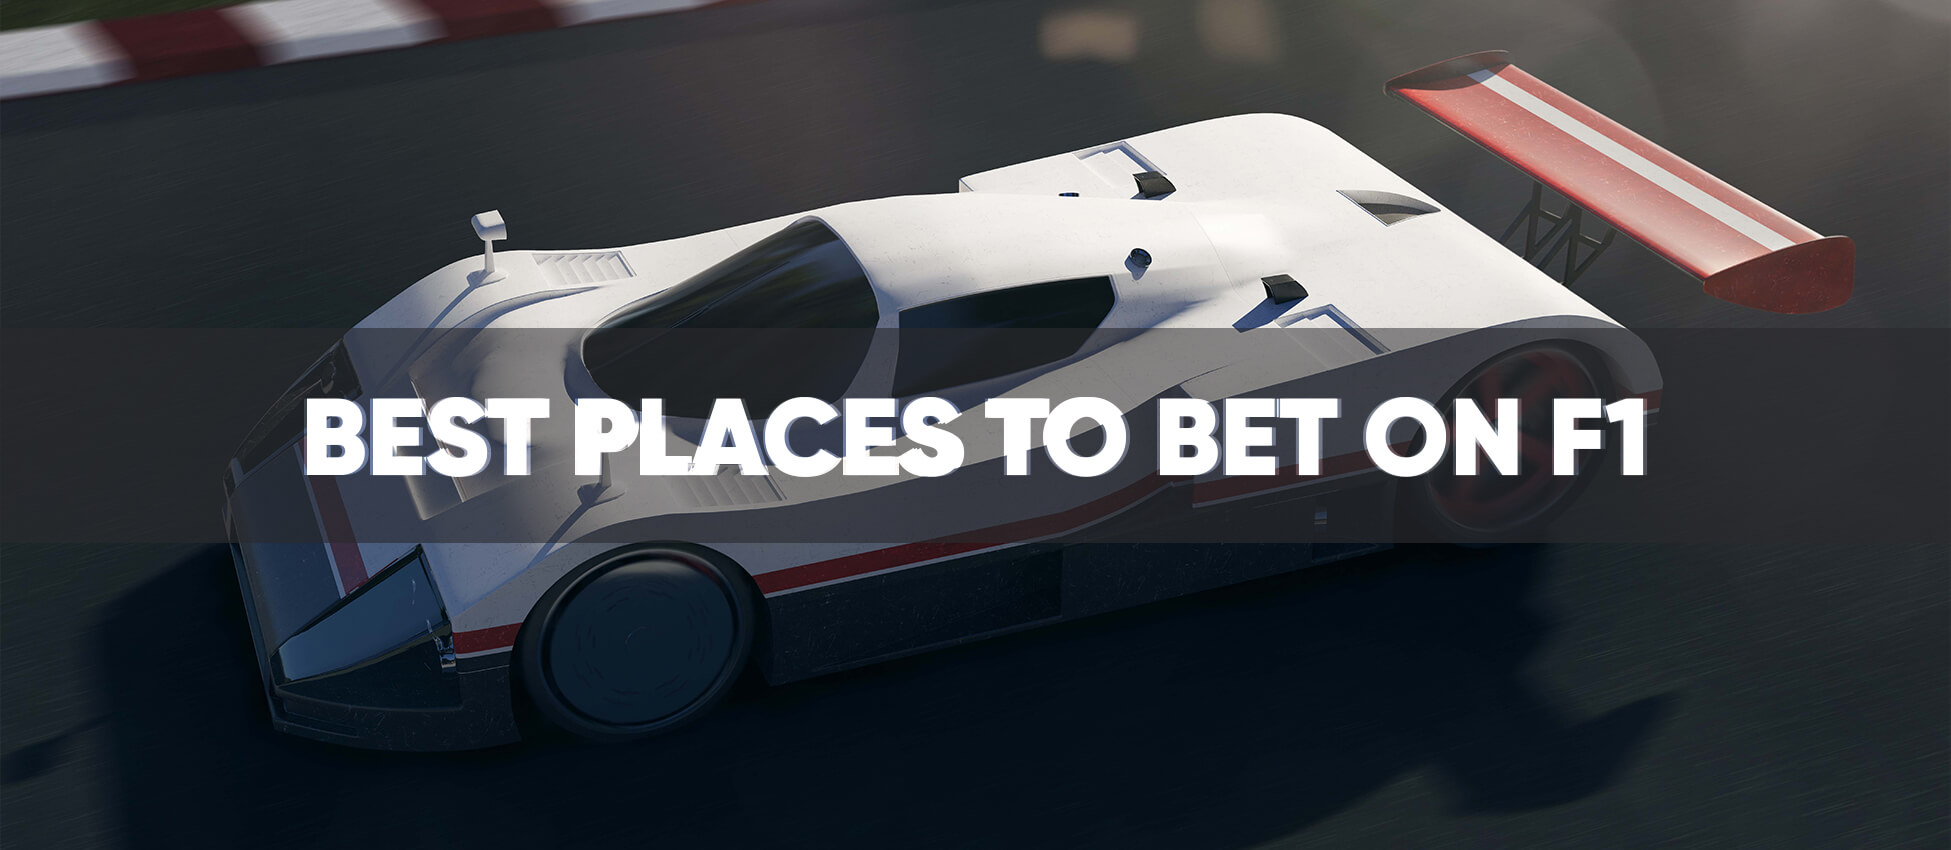 Best places to bet on F1